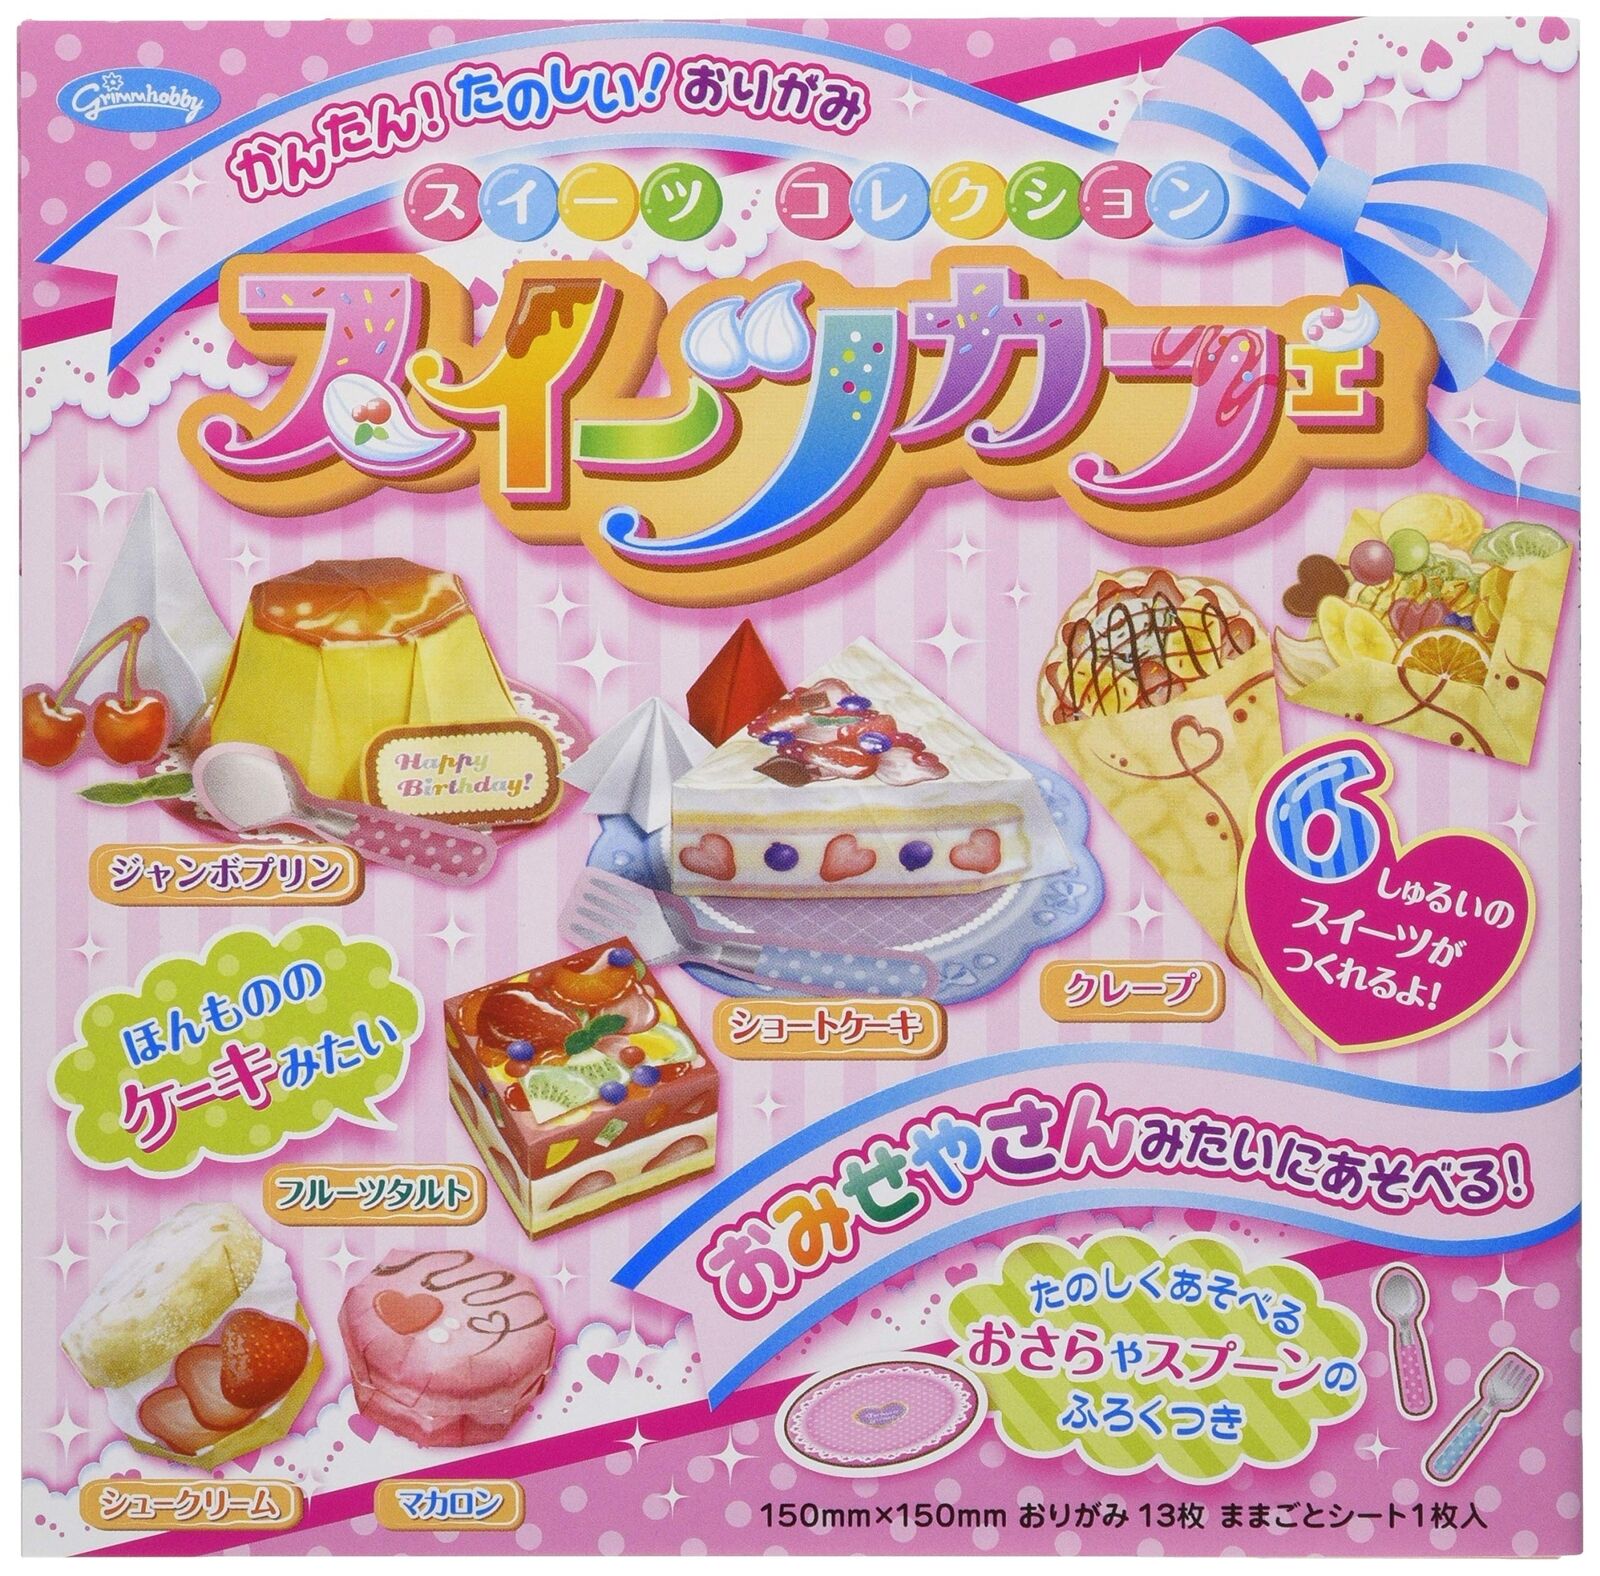 Showa Grimm Origami Sweets Collection Sweets Cafe 28-3746 10 pieces